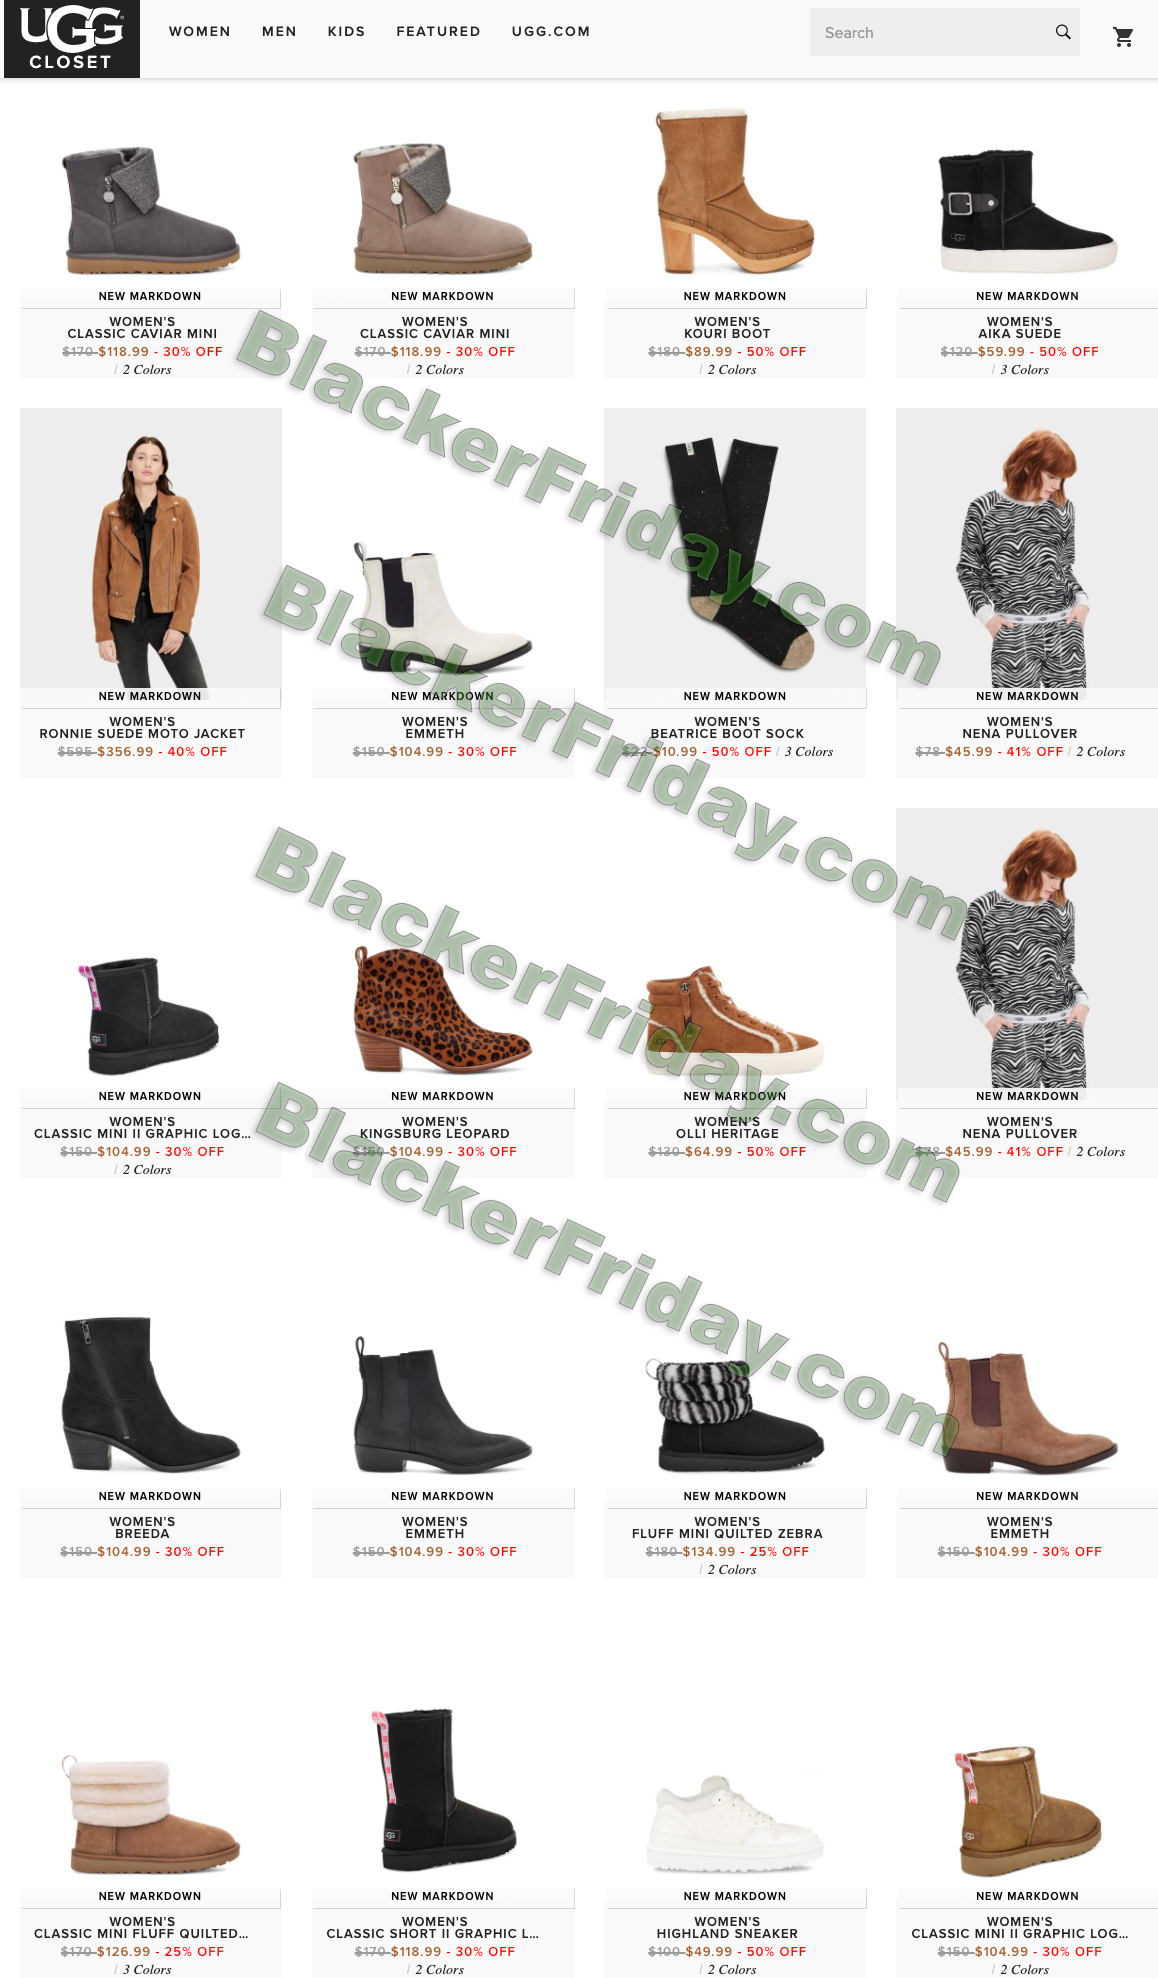 delinquency Be surprised librarian UGG Black Friday 2022 Sale & Ad - What to Expect - Blacker Friday